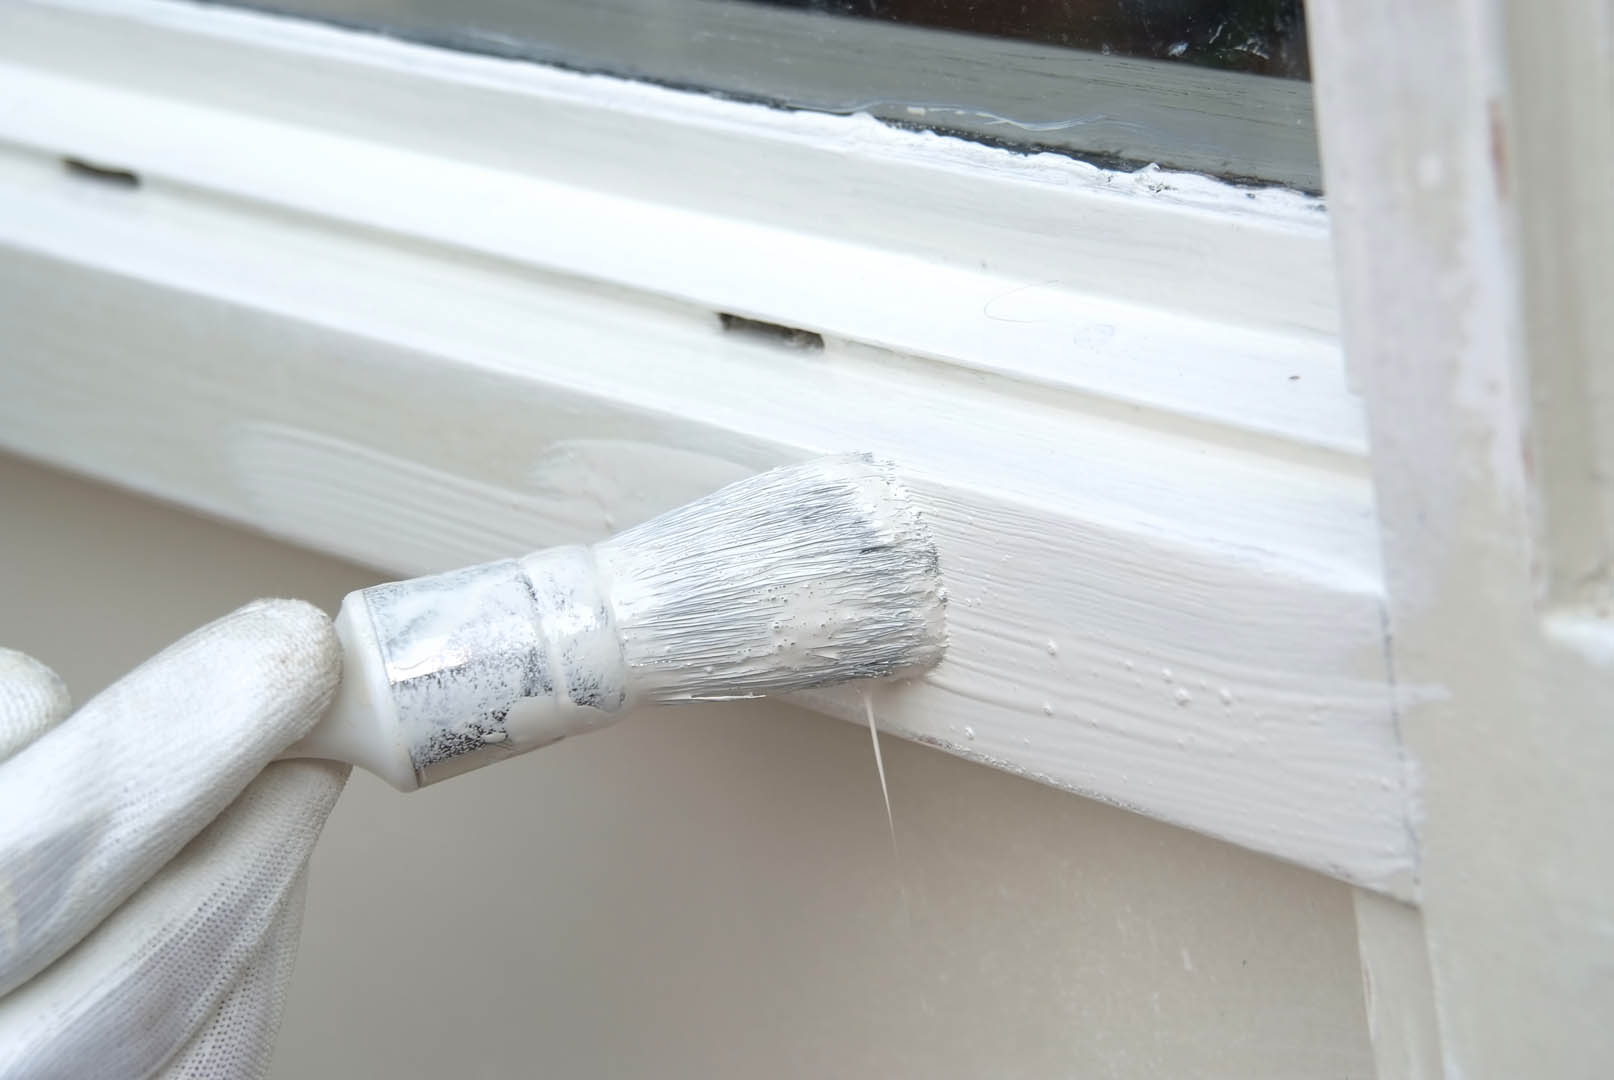 A brush is on the side of a window.